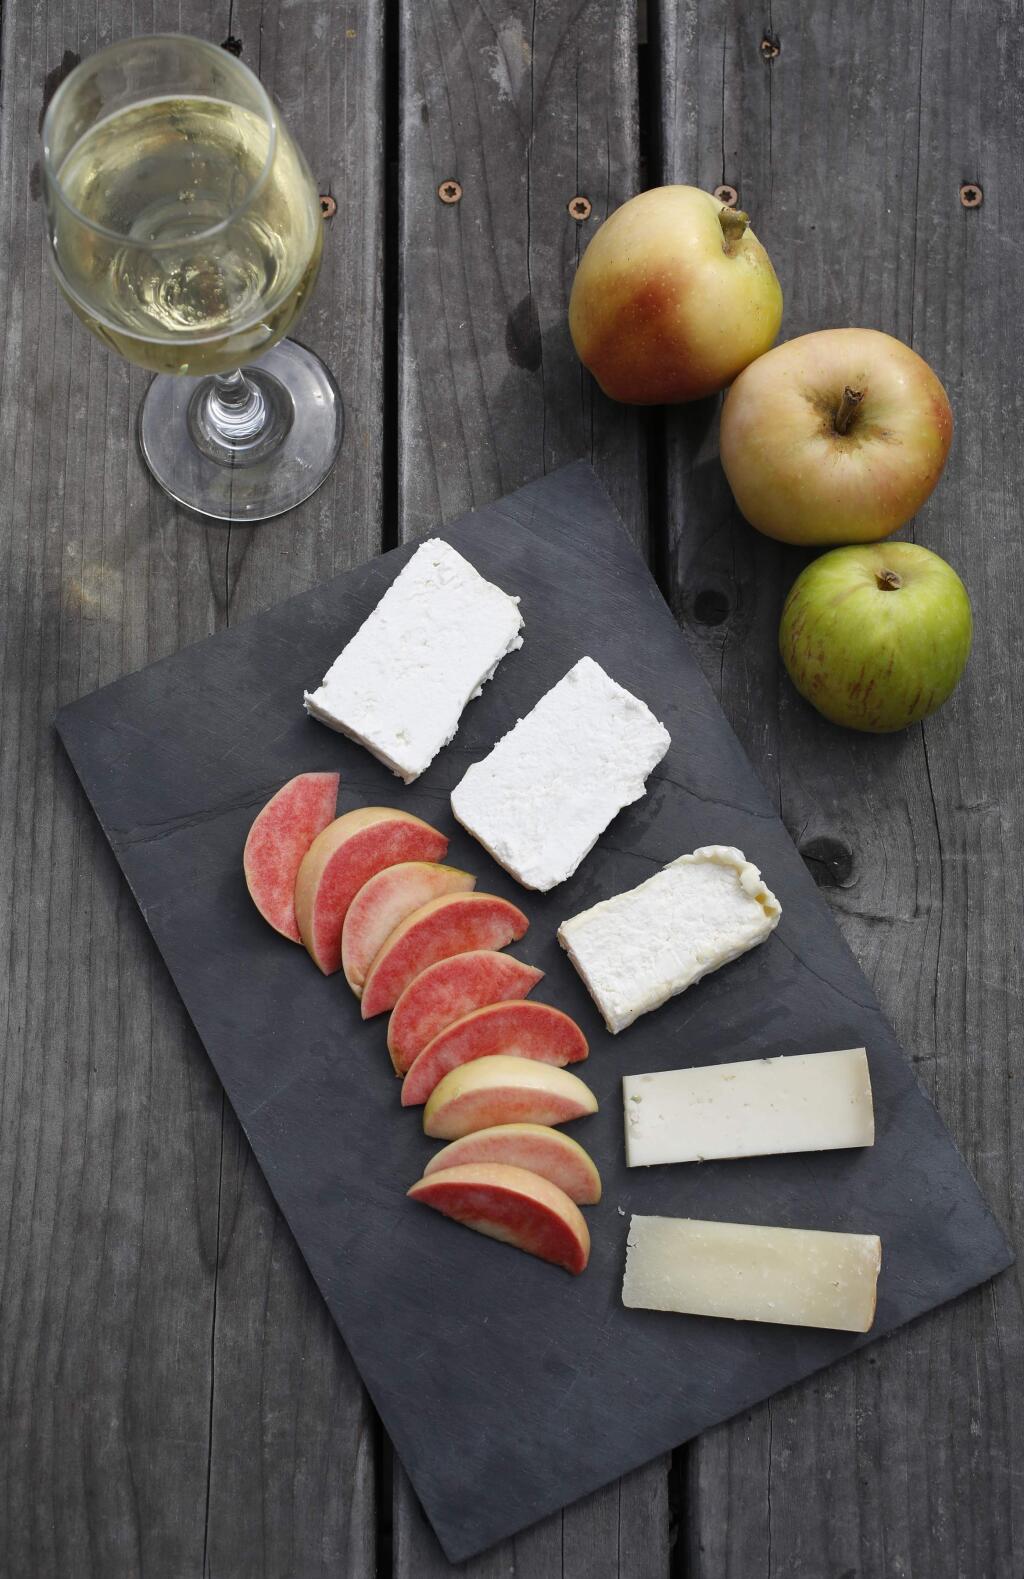 Tomales Farmstead Creamery was a Good Food Award in the cheese category in January. Here its cheeses are paired with Devoto Orchard's Estate Cider and slices of Pink Pearl apples in Sebastopol. (BETH SCHLANKER/ The Press Democrat)